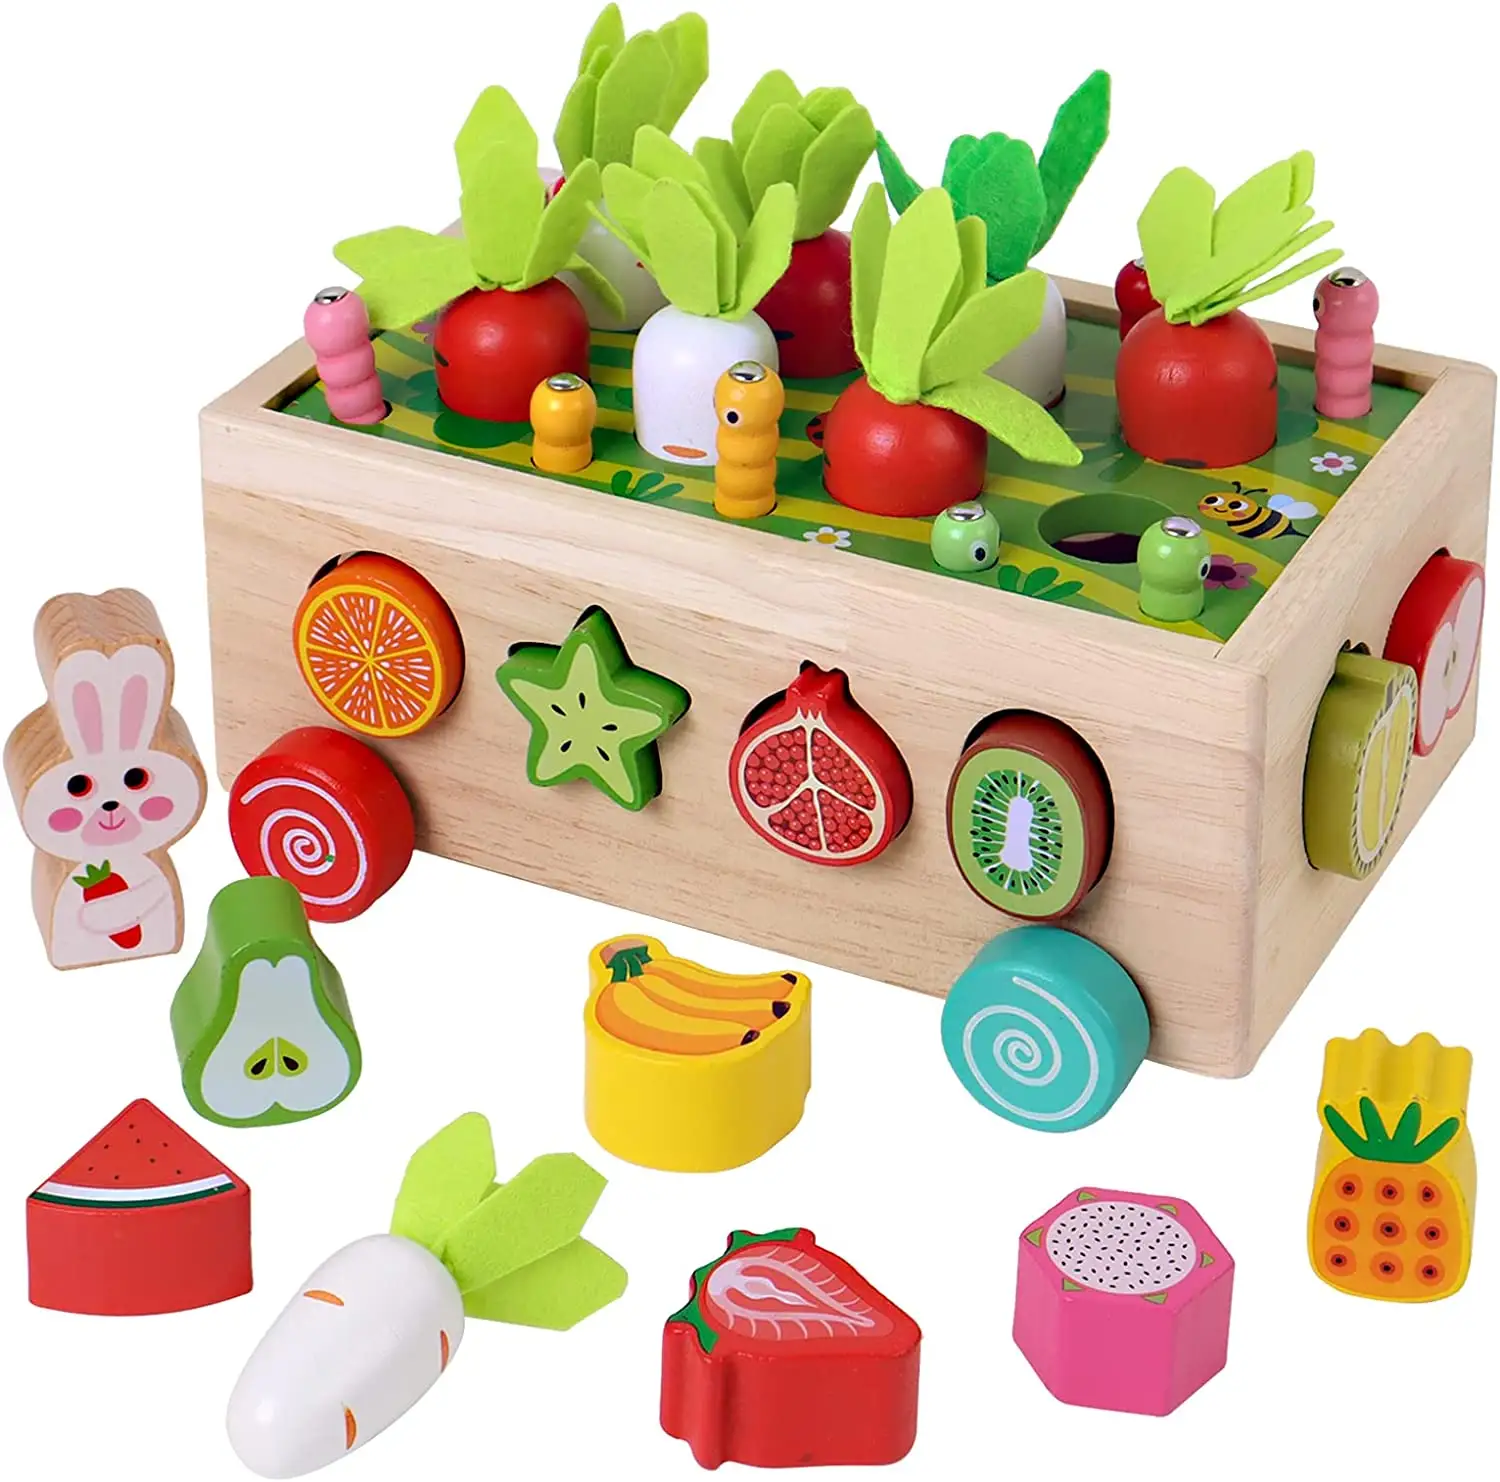 TT Trending Products Wooden Shape Sorter Puzzle Toy Children Education Shape Sorter Building Toys Carrot Harvest Game Wooden Toy